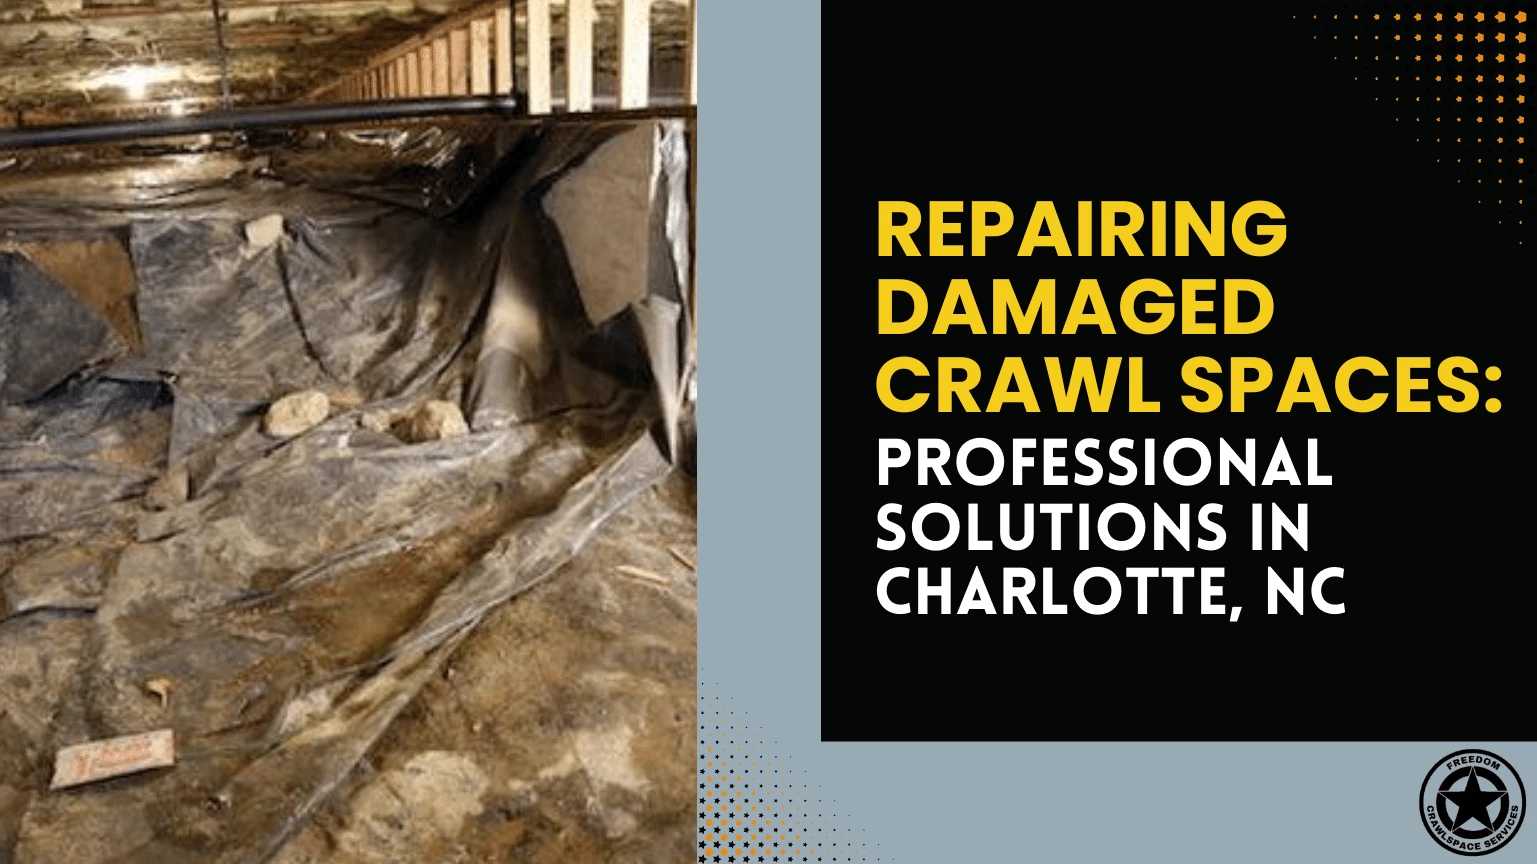 repairing damaged crawl spaces professional solutions in charlotte, nc